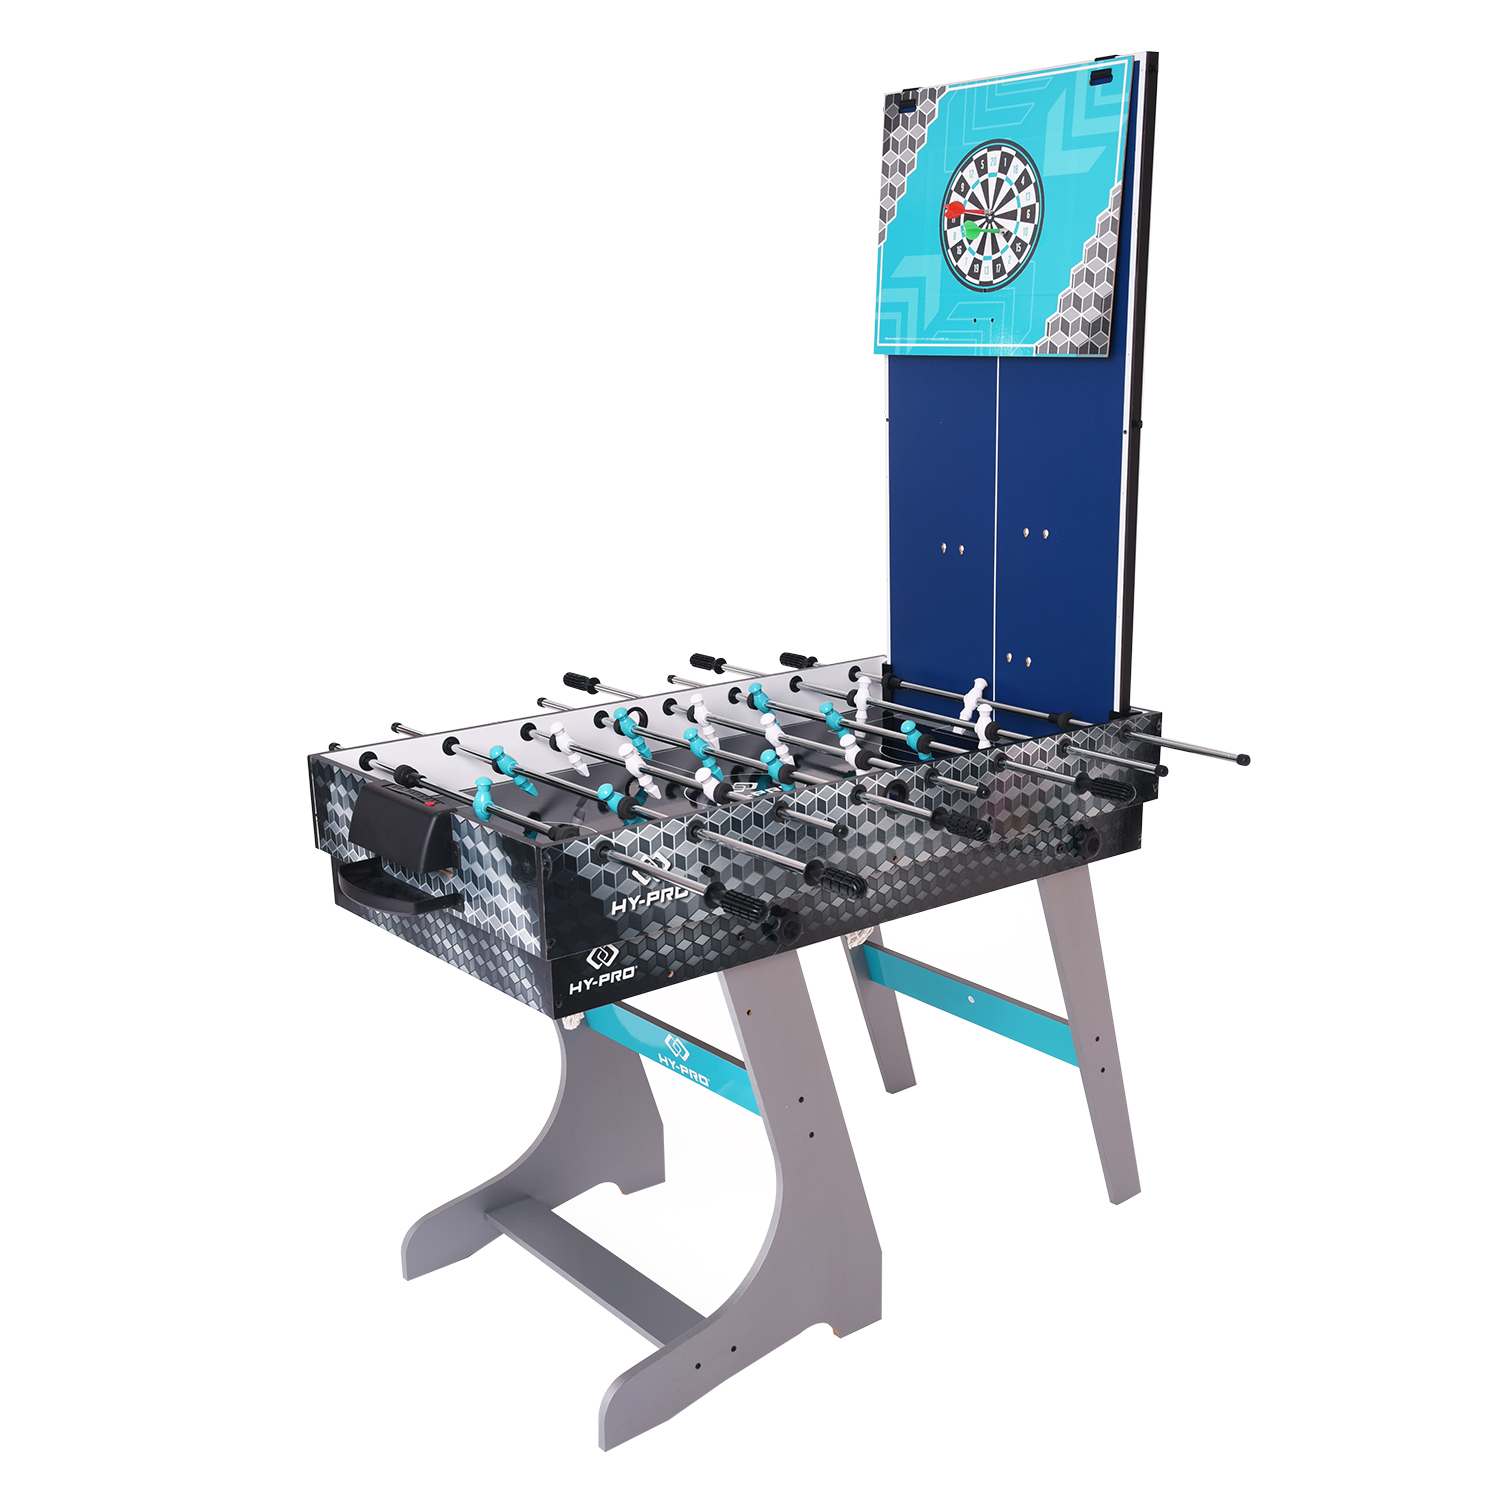 HY-PRO 8-in-1 Folding Combo Game Table (Football, Table Tennis, Pool, Hockey, Archery, Darts, Bean Bag Toss, Basketball) - image 5 of 11